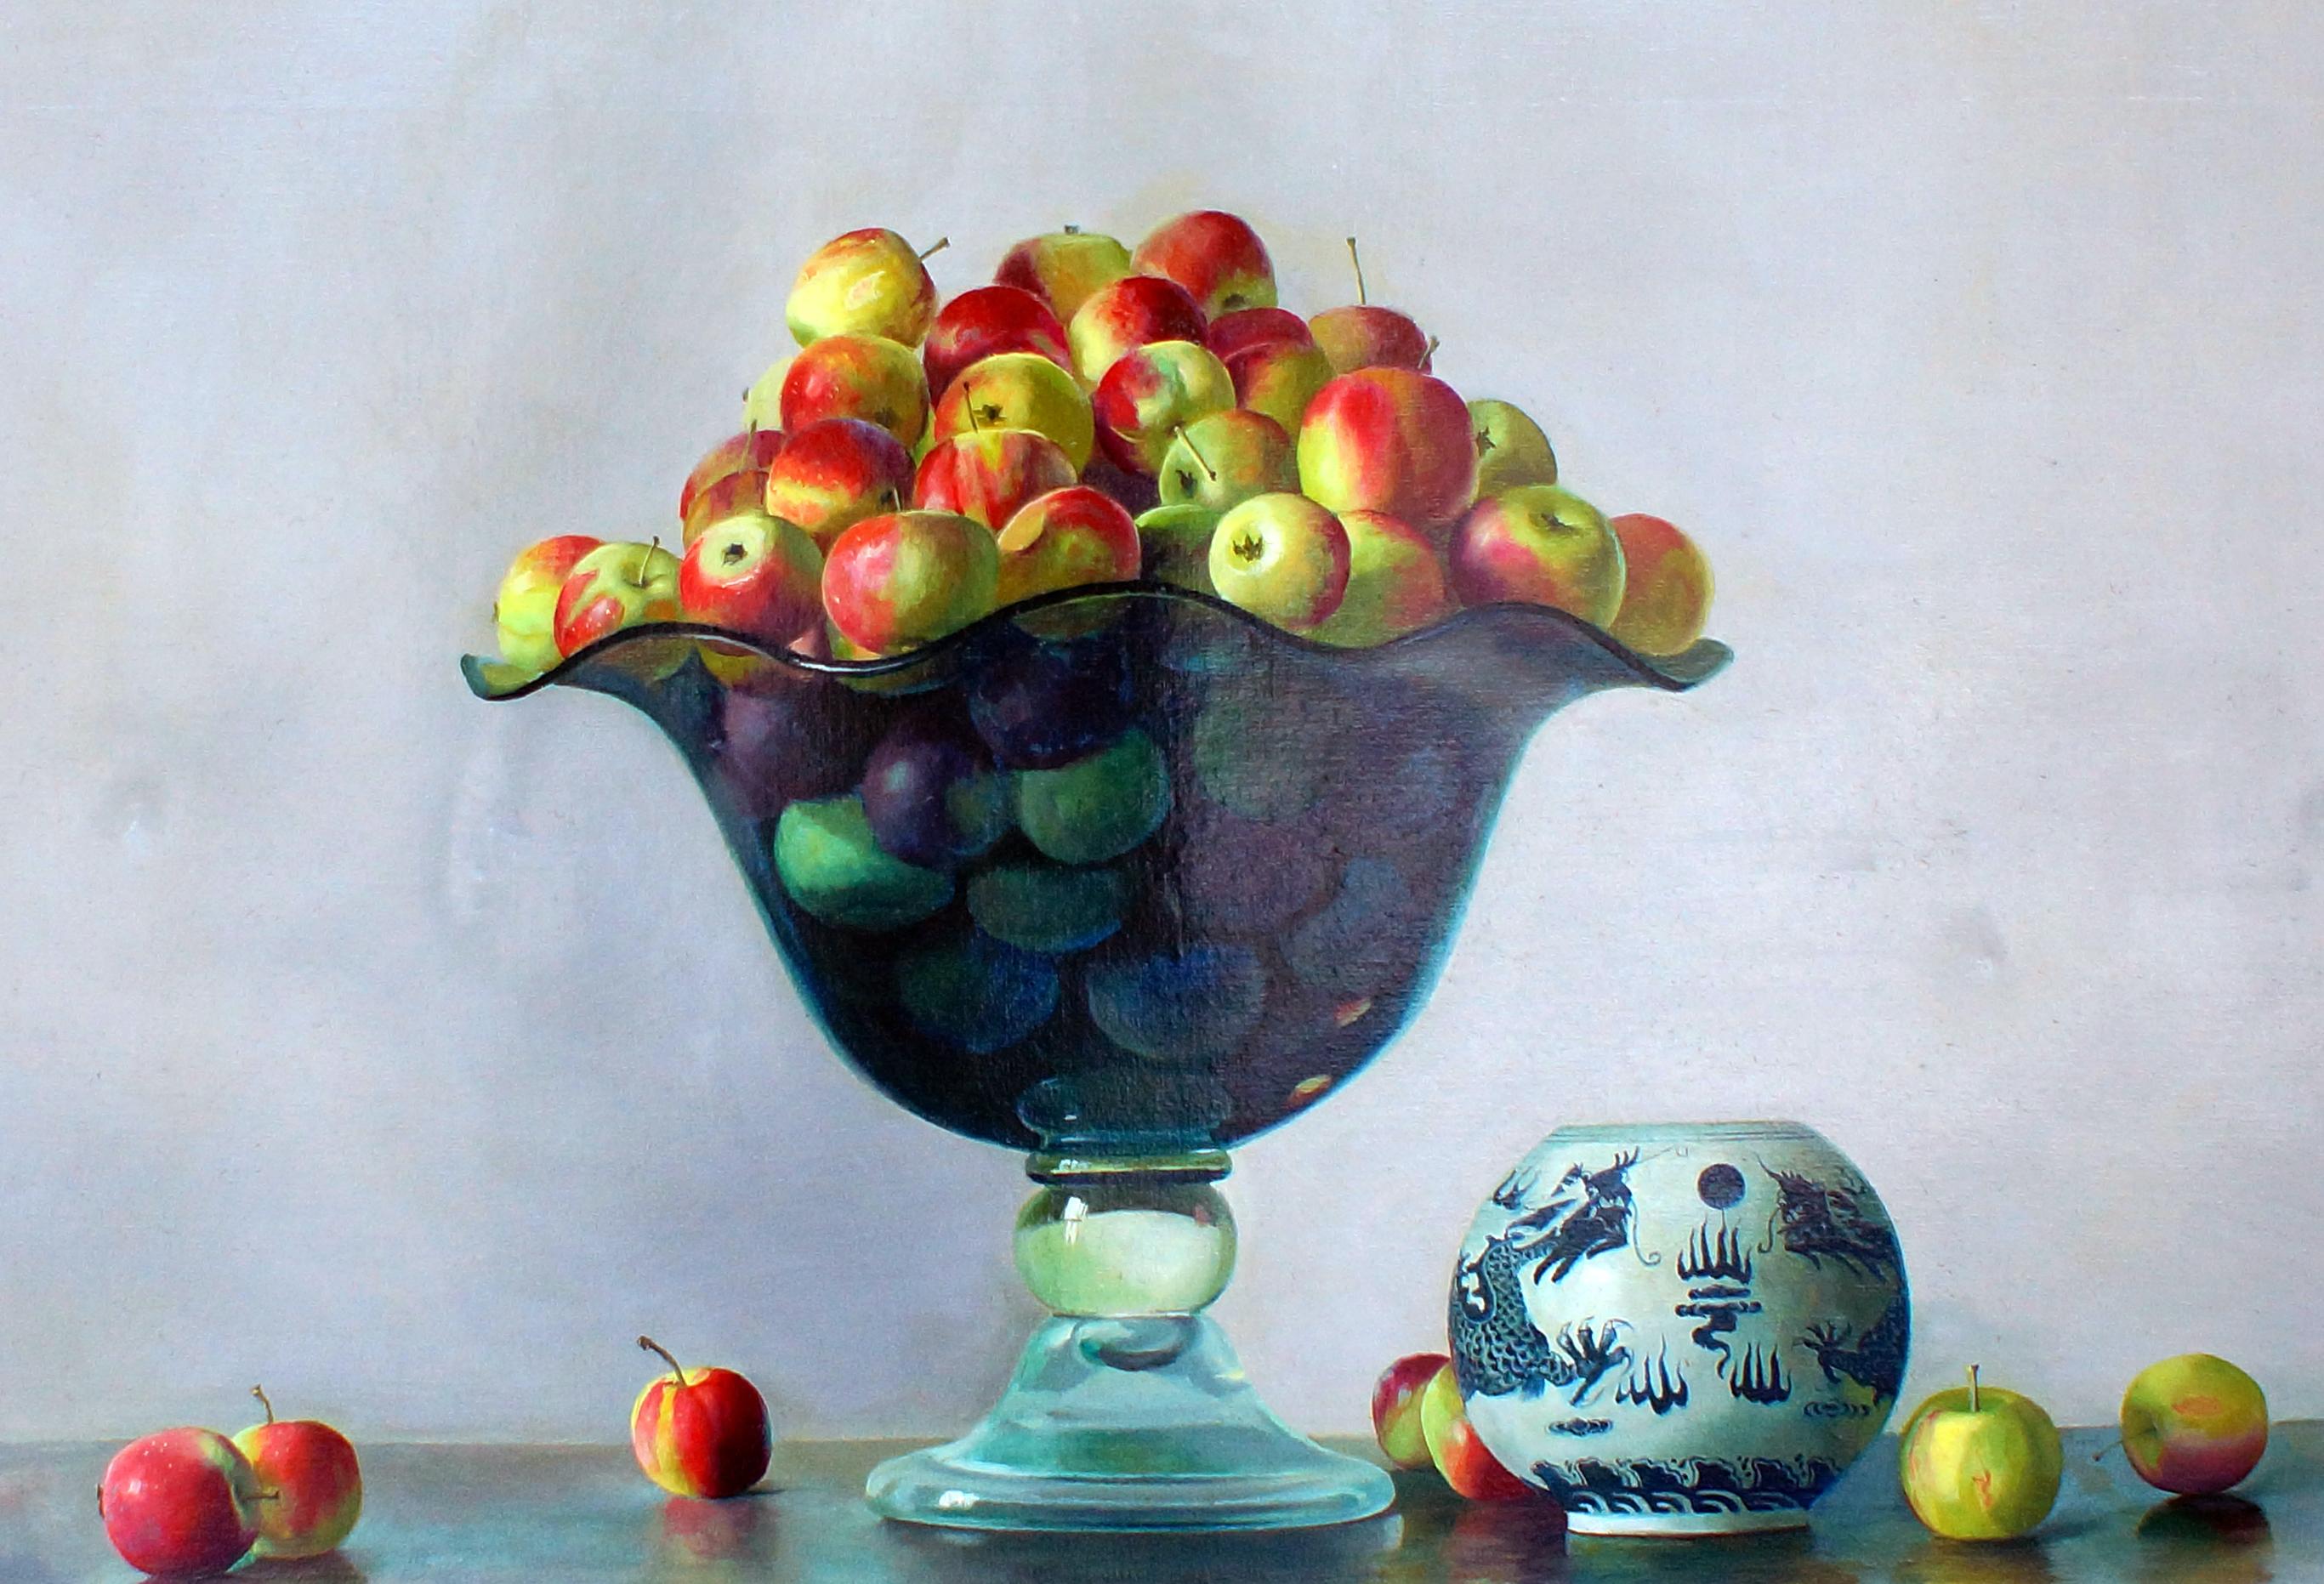 Crystal Vase with apples - Oil on Canvas - 2001 - Painting by Zhang Wei Guang